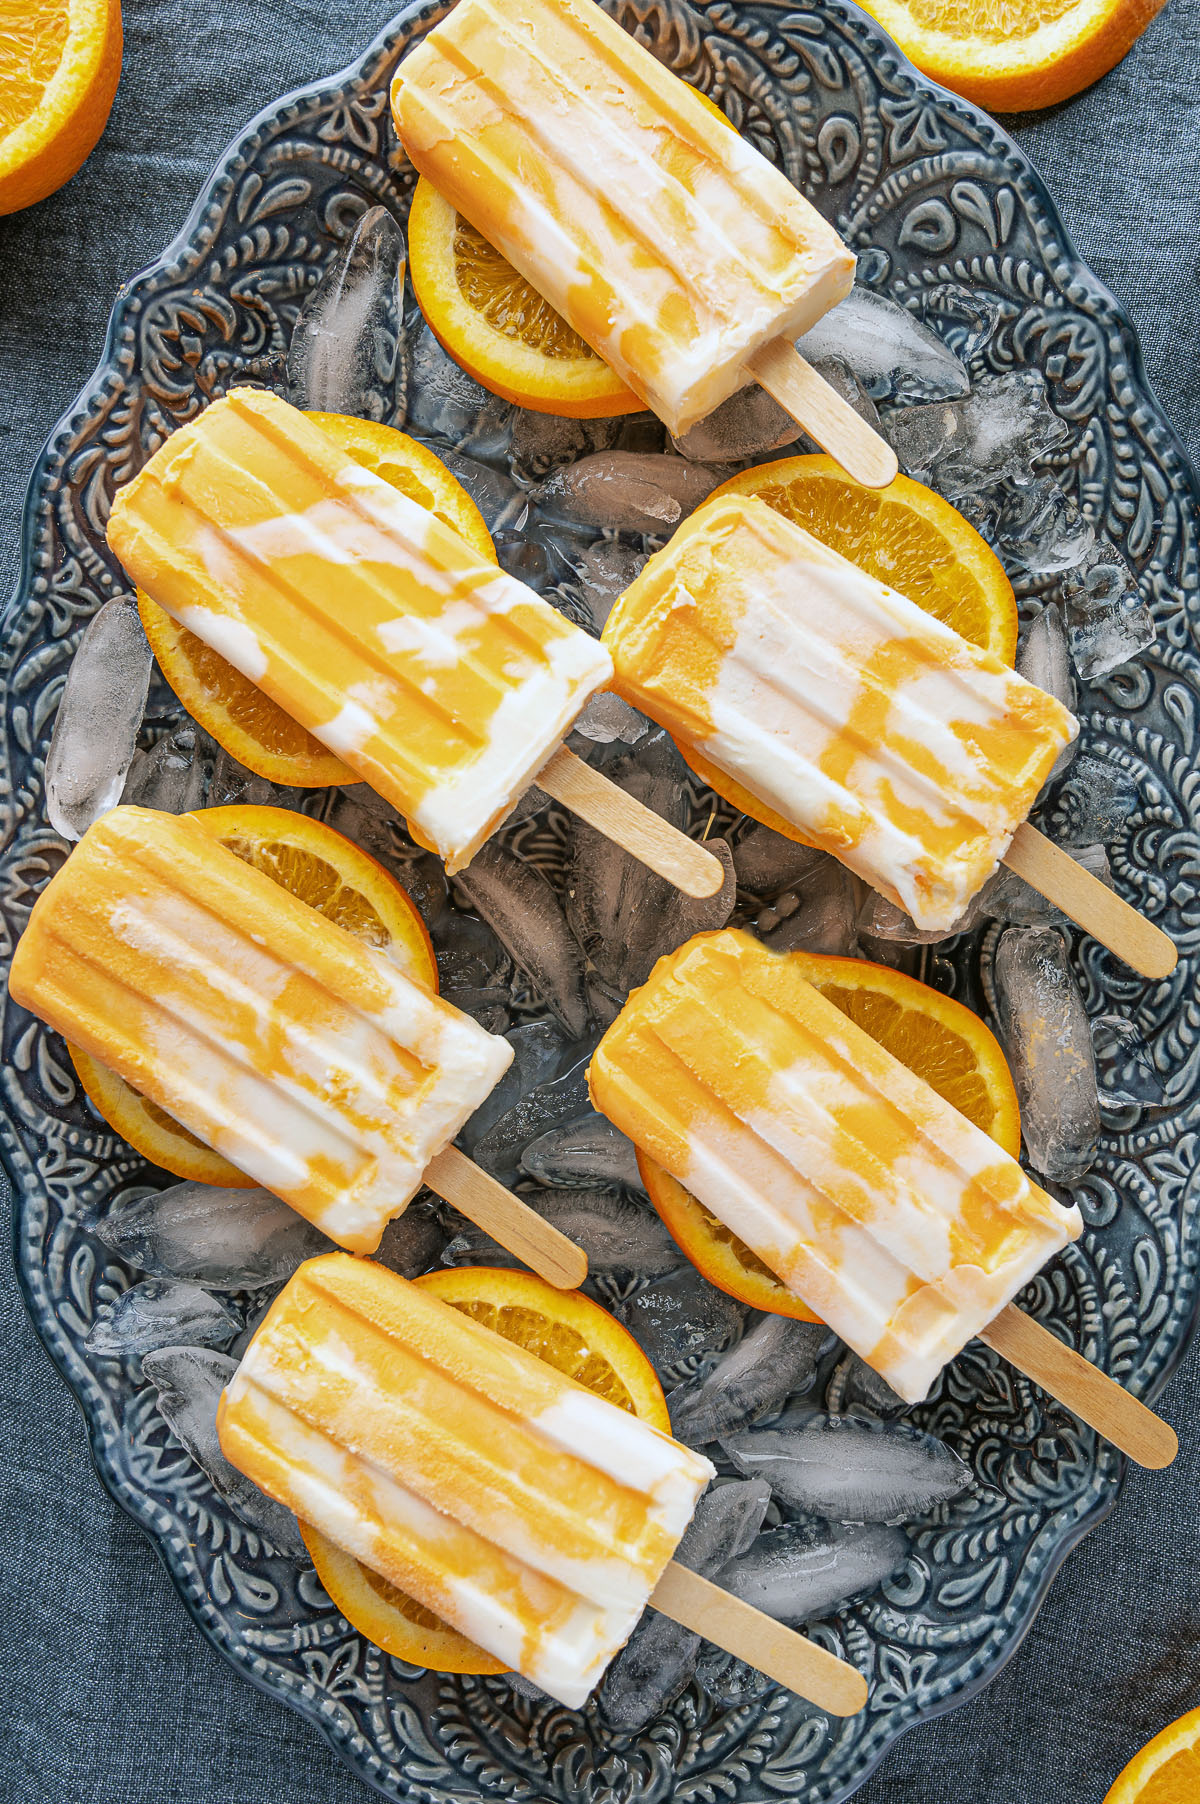 Orange and white marbled creamsicle popsicles resting on a blue platter of ice and orange slices